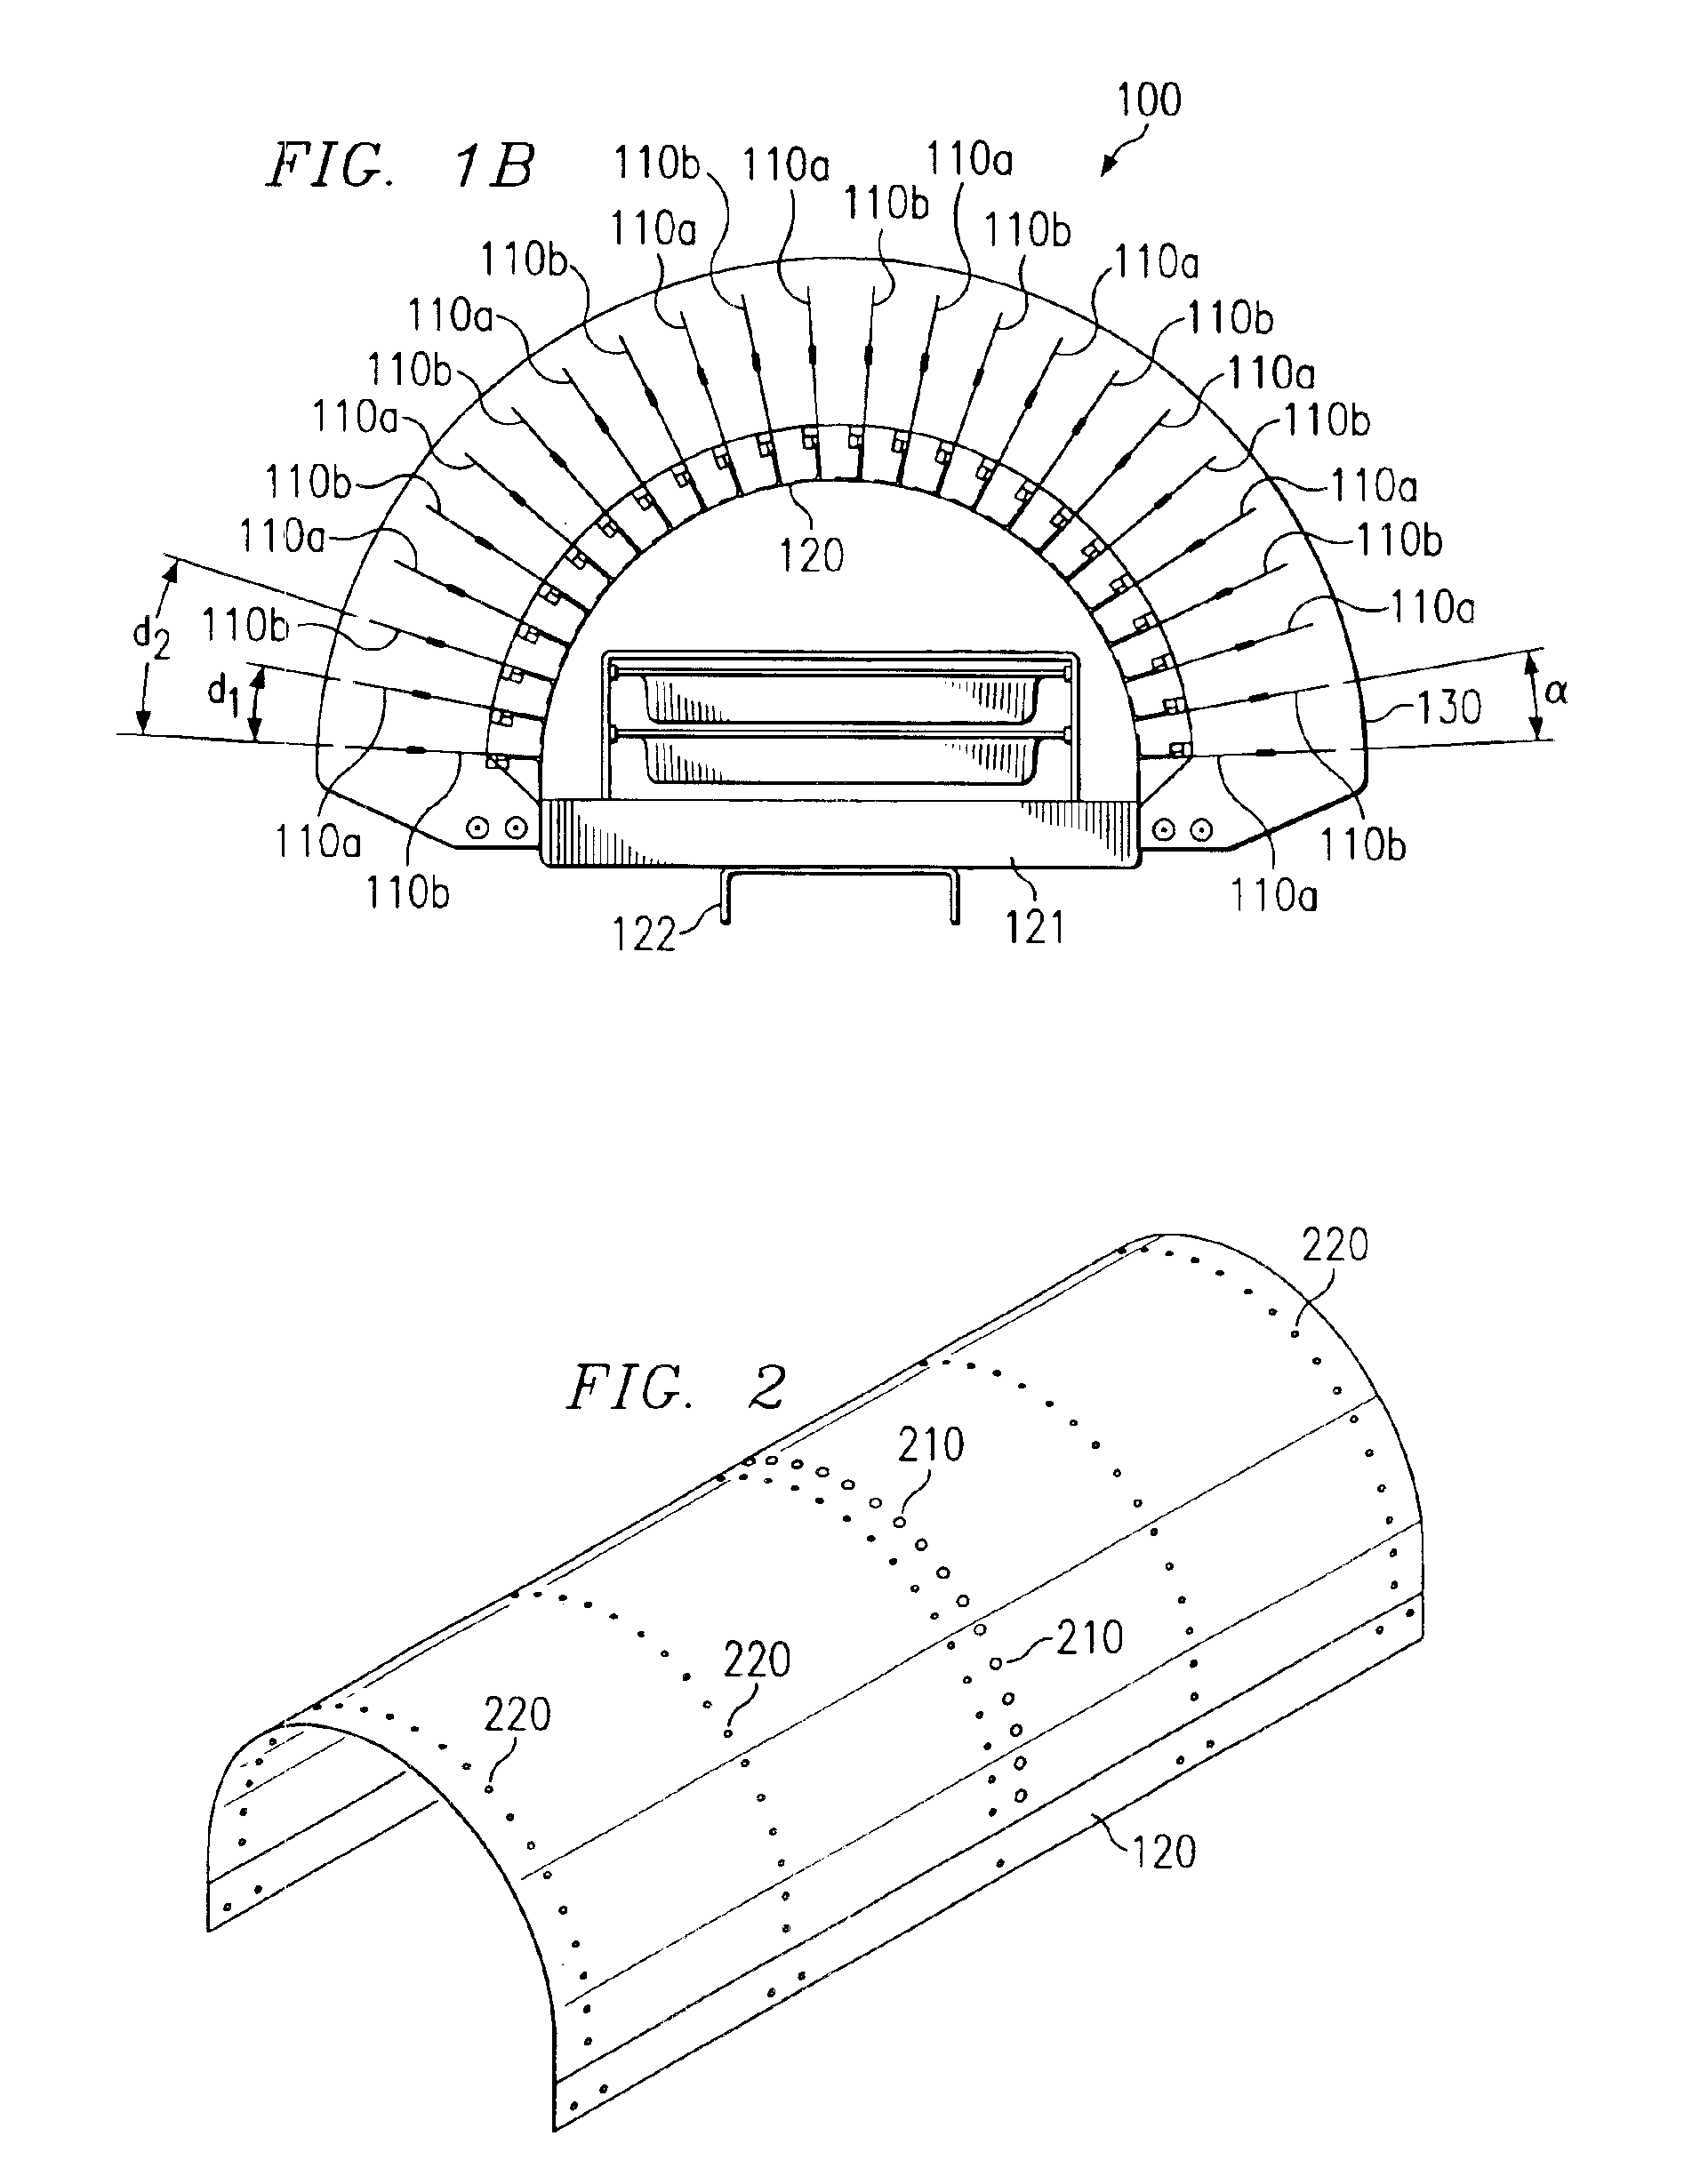 Co-located antenna array for passive beam forming